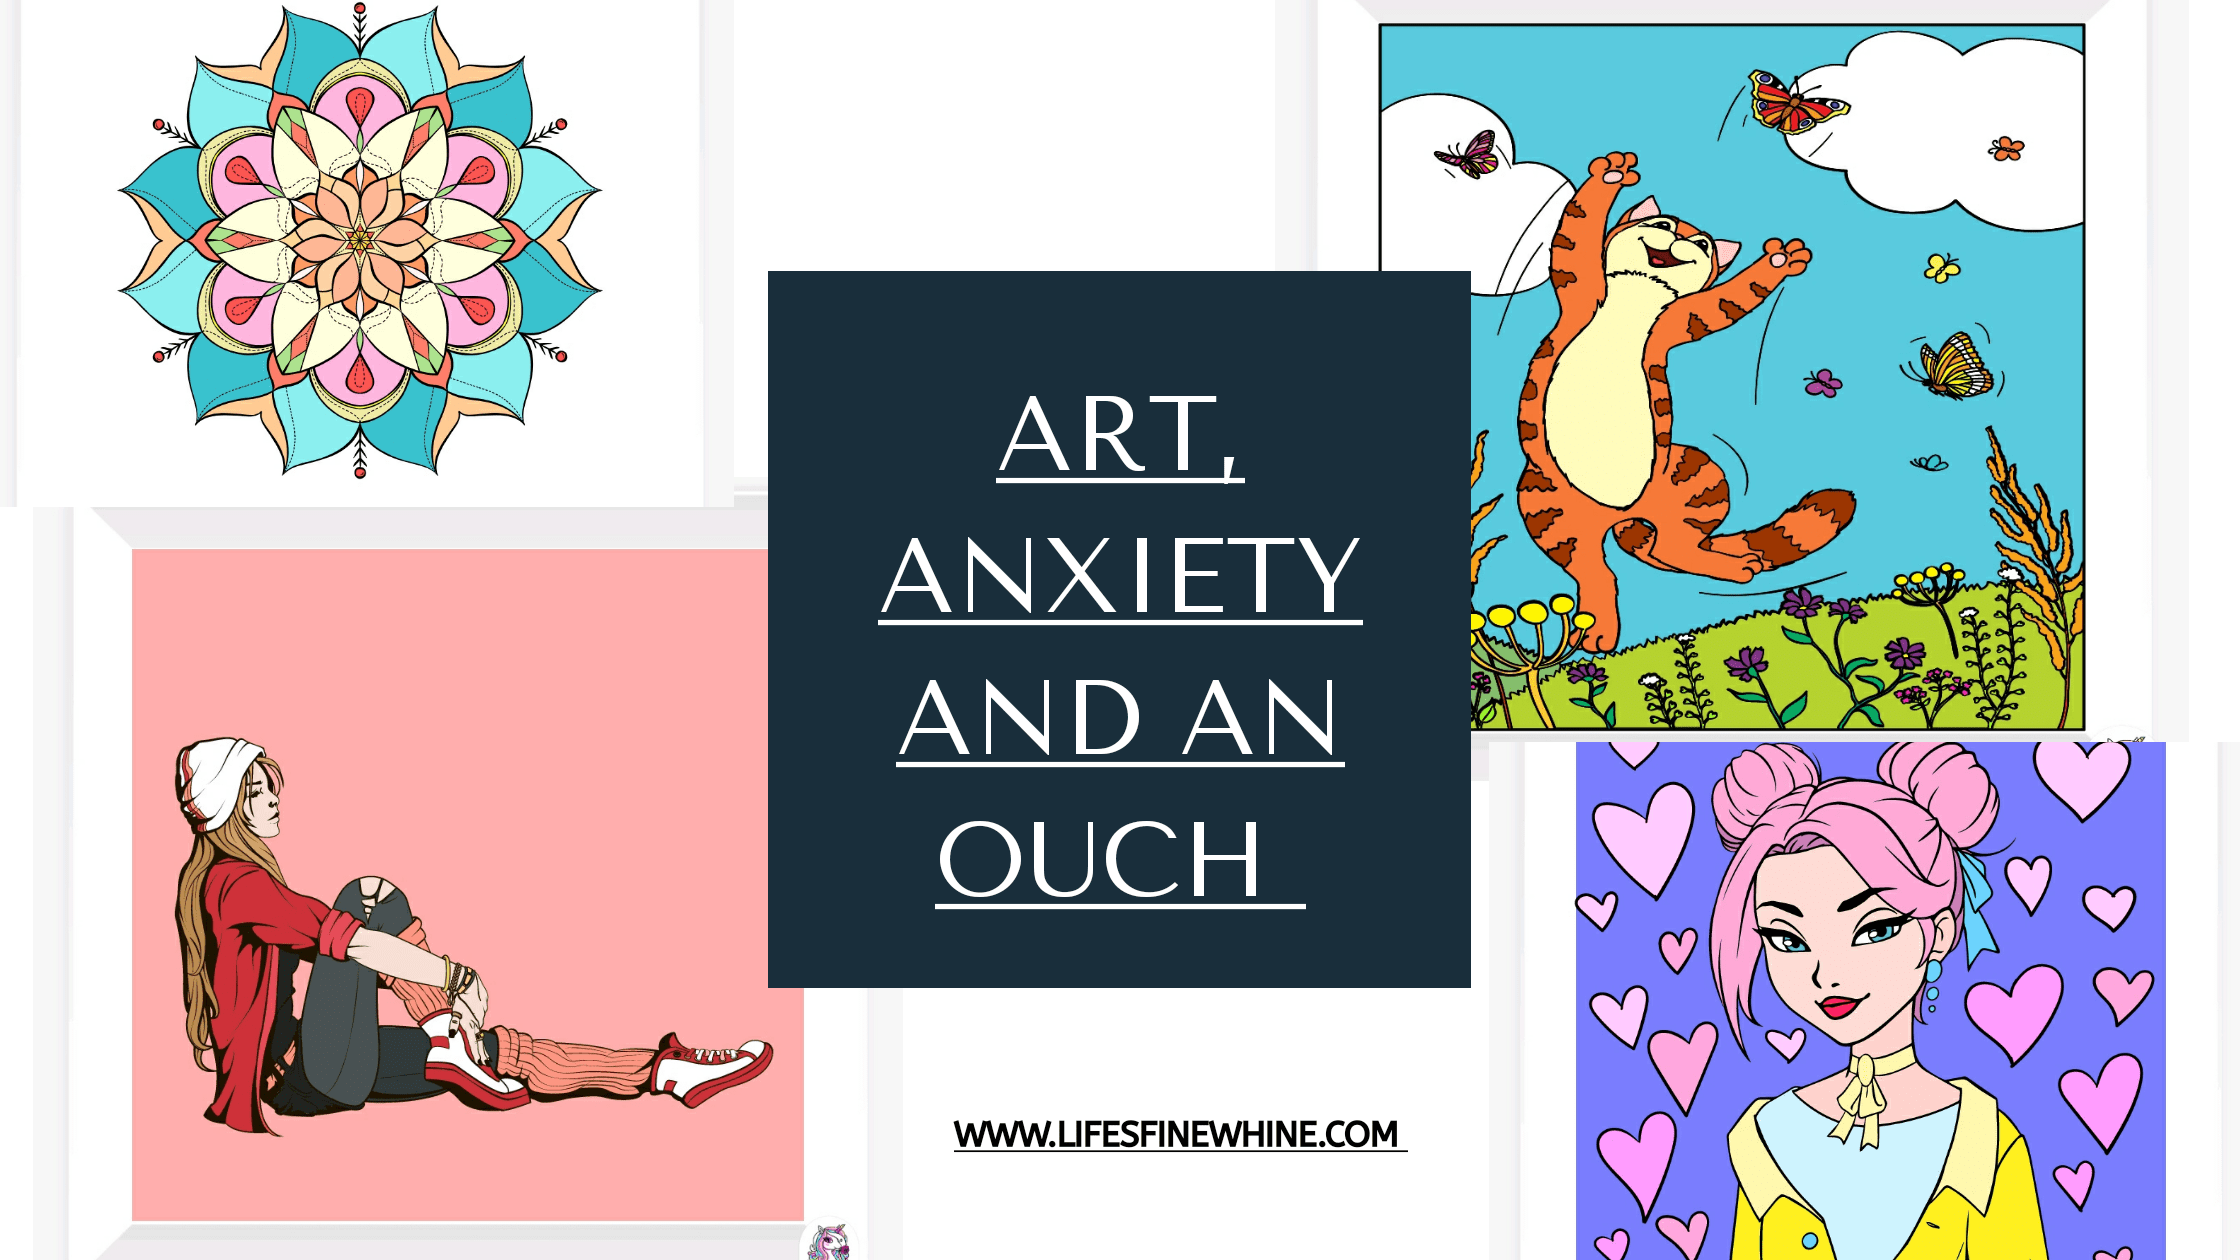 Art, Anxiety And An Ouch